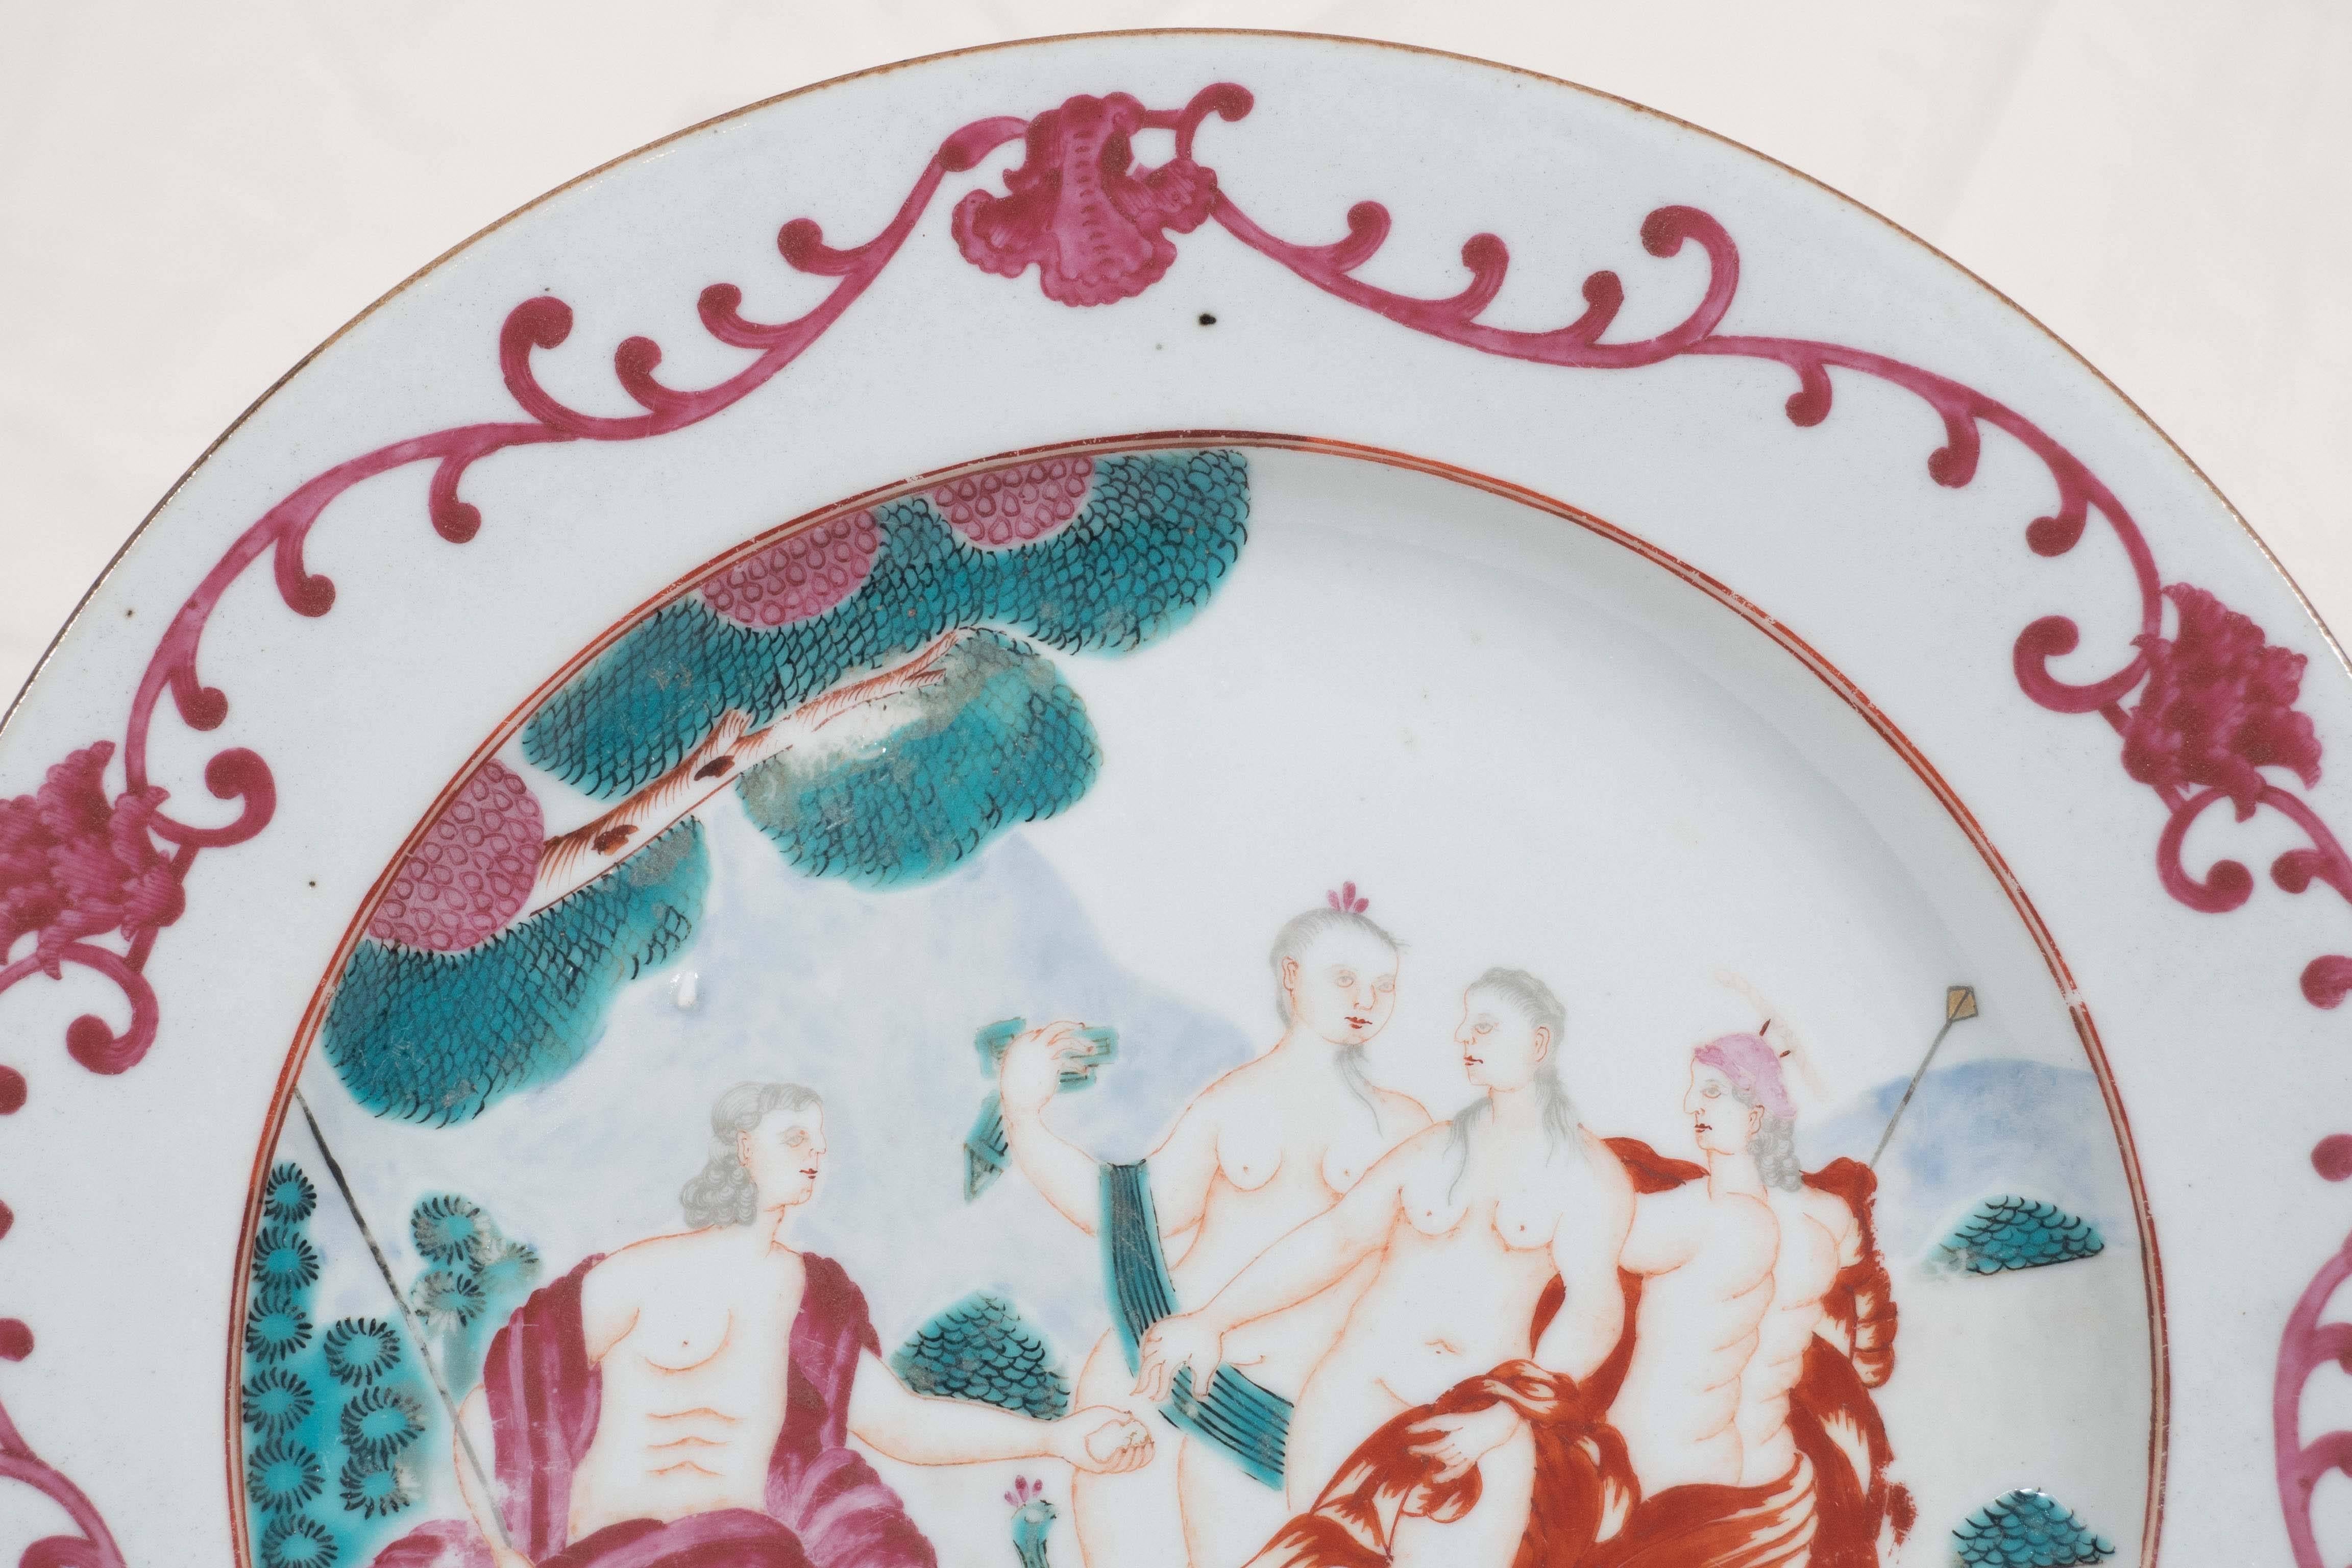 Mid-18th Century Judgment of Paris Chinese Export Plate